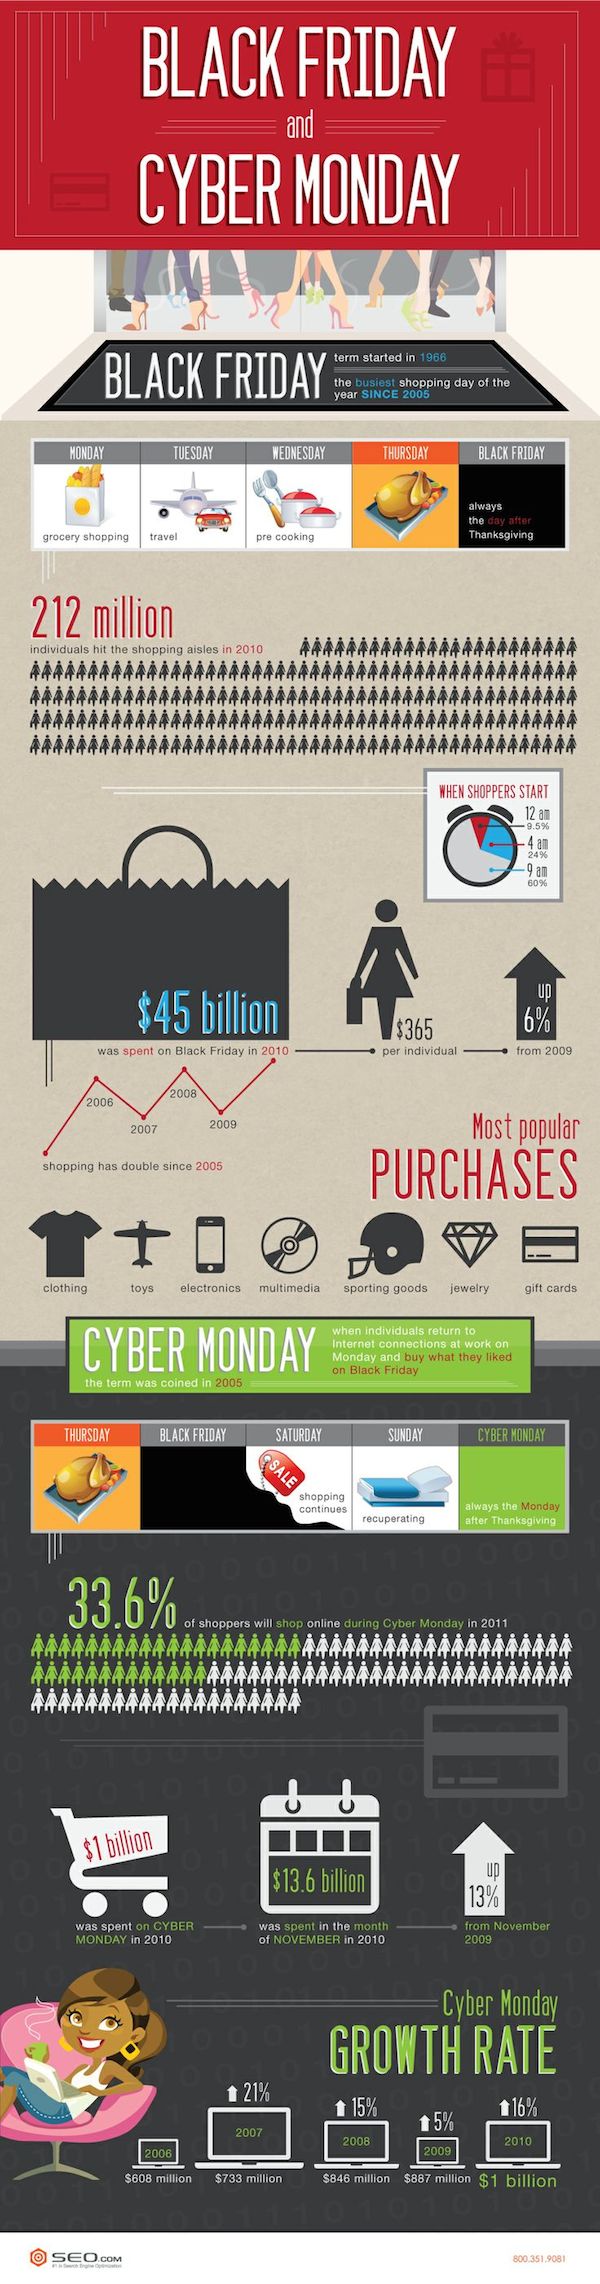 20 Black Friday And Cyber Monday Infographics image bl.jpg